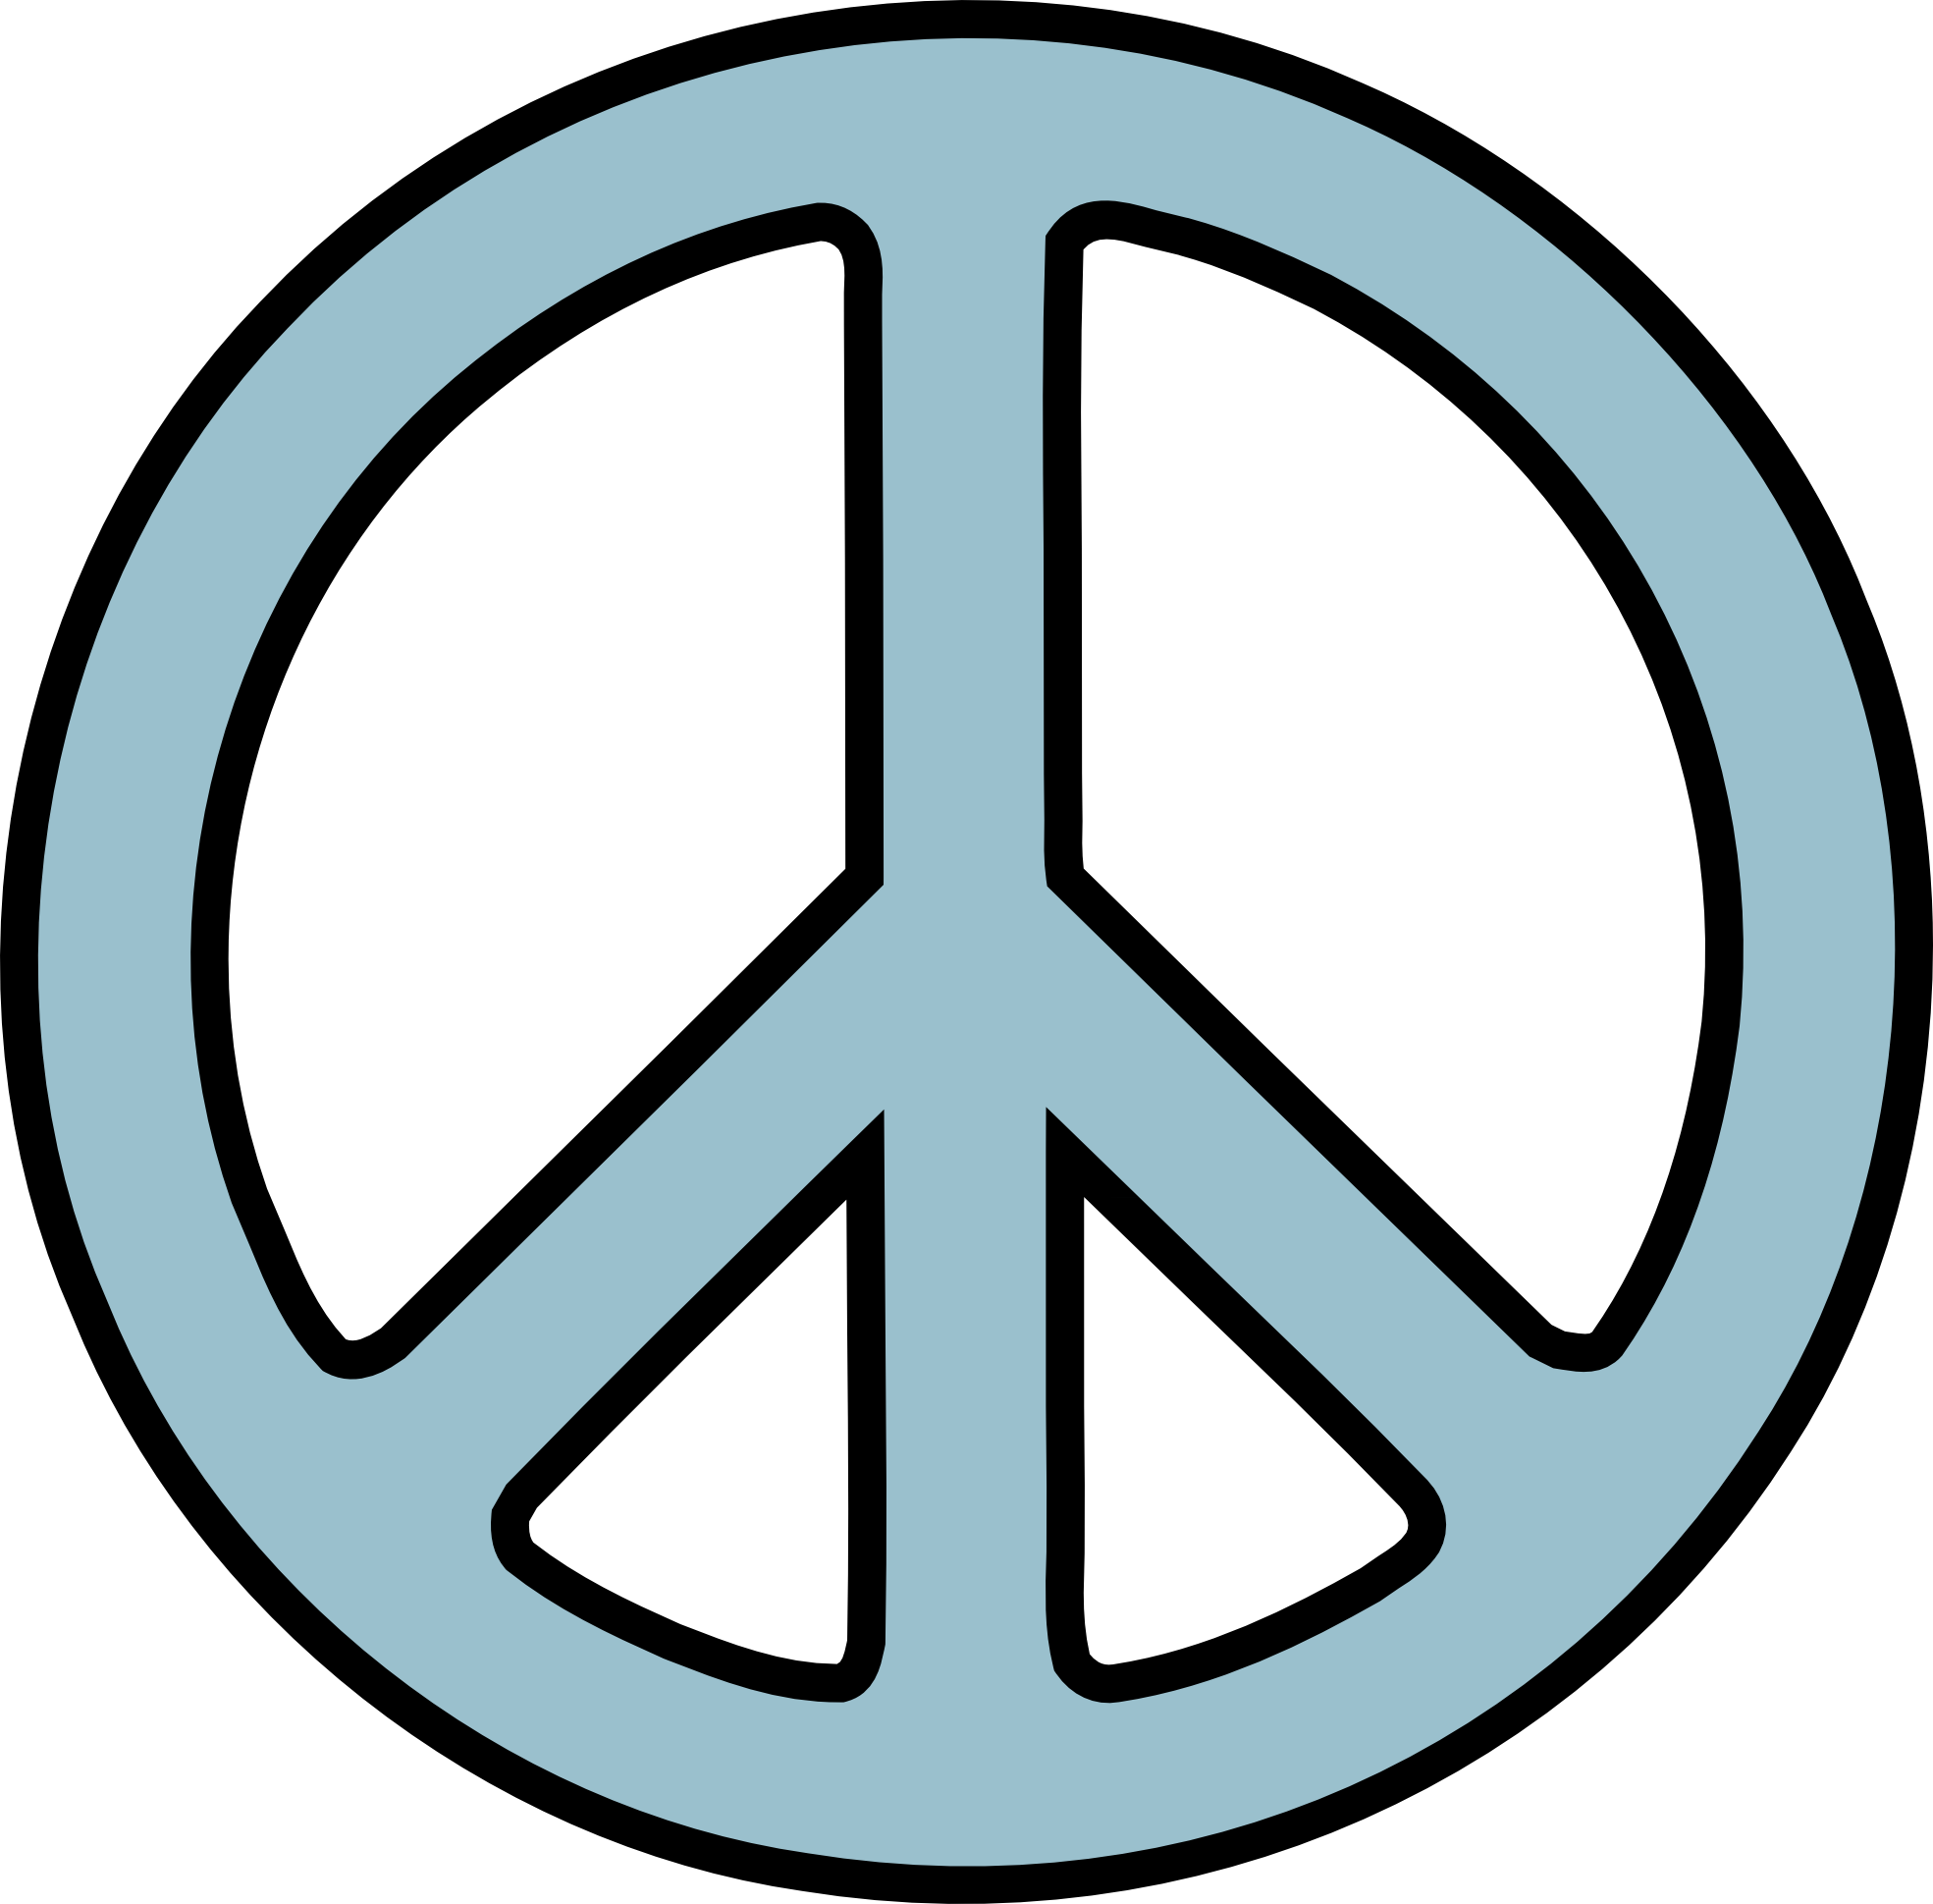 A Peace Sign With A Black Background